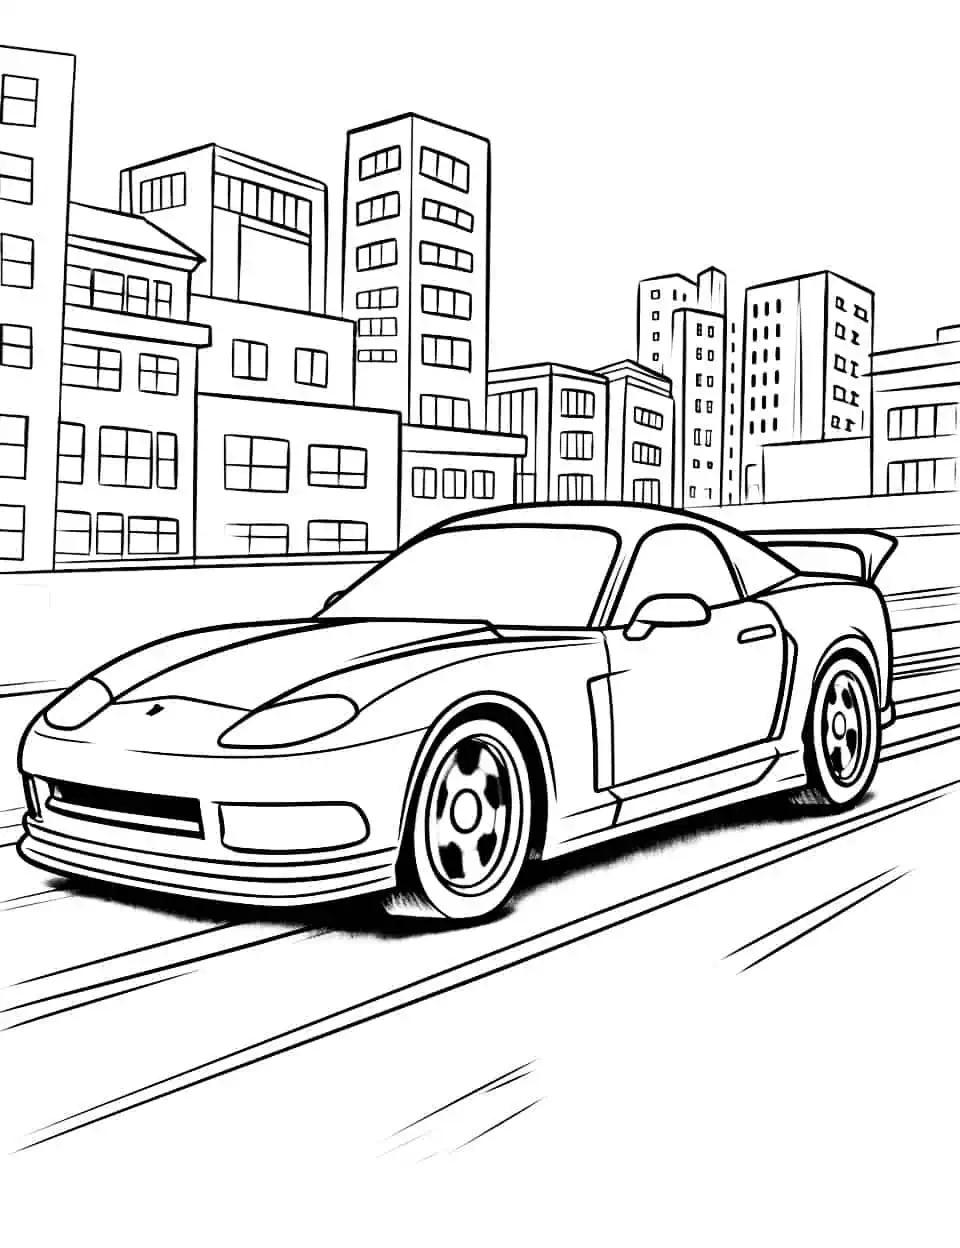 Fast and Furious Car Coloring Page - A very fast car zooming down a city street for speed-loving kids.